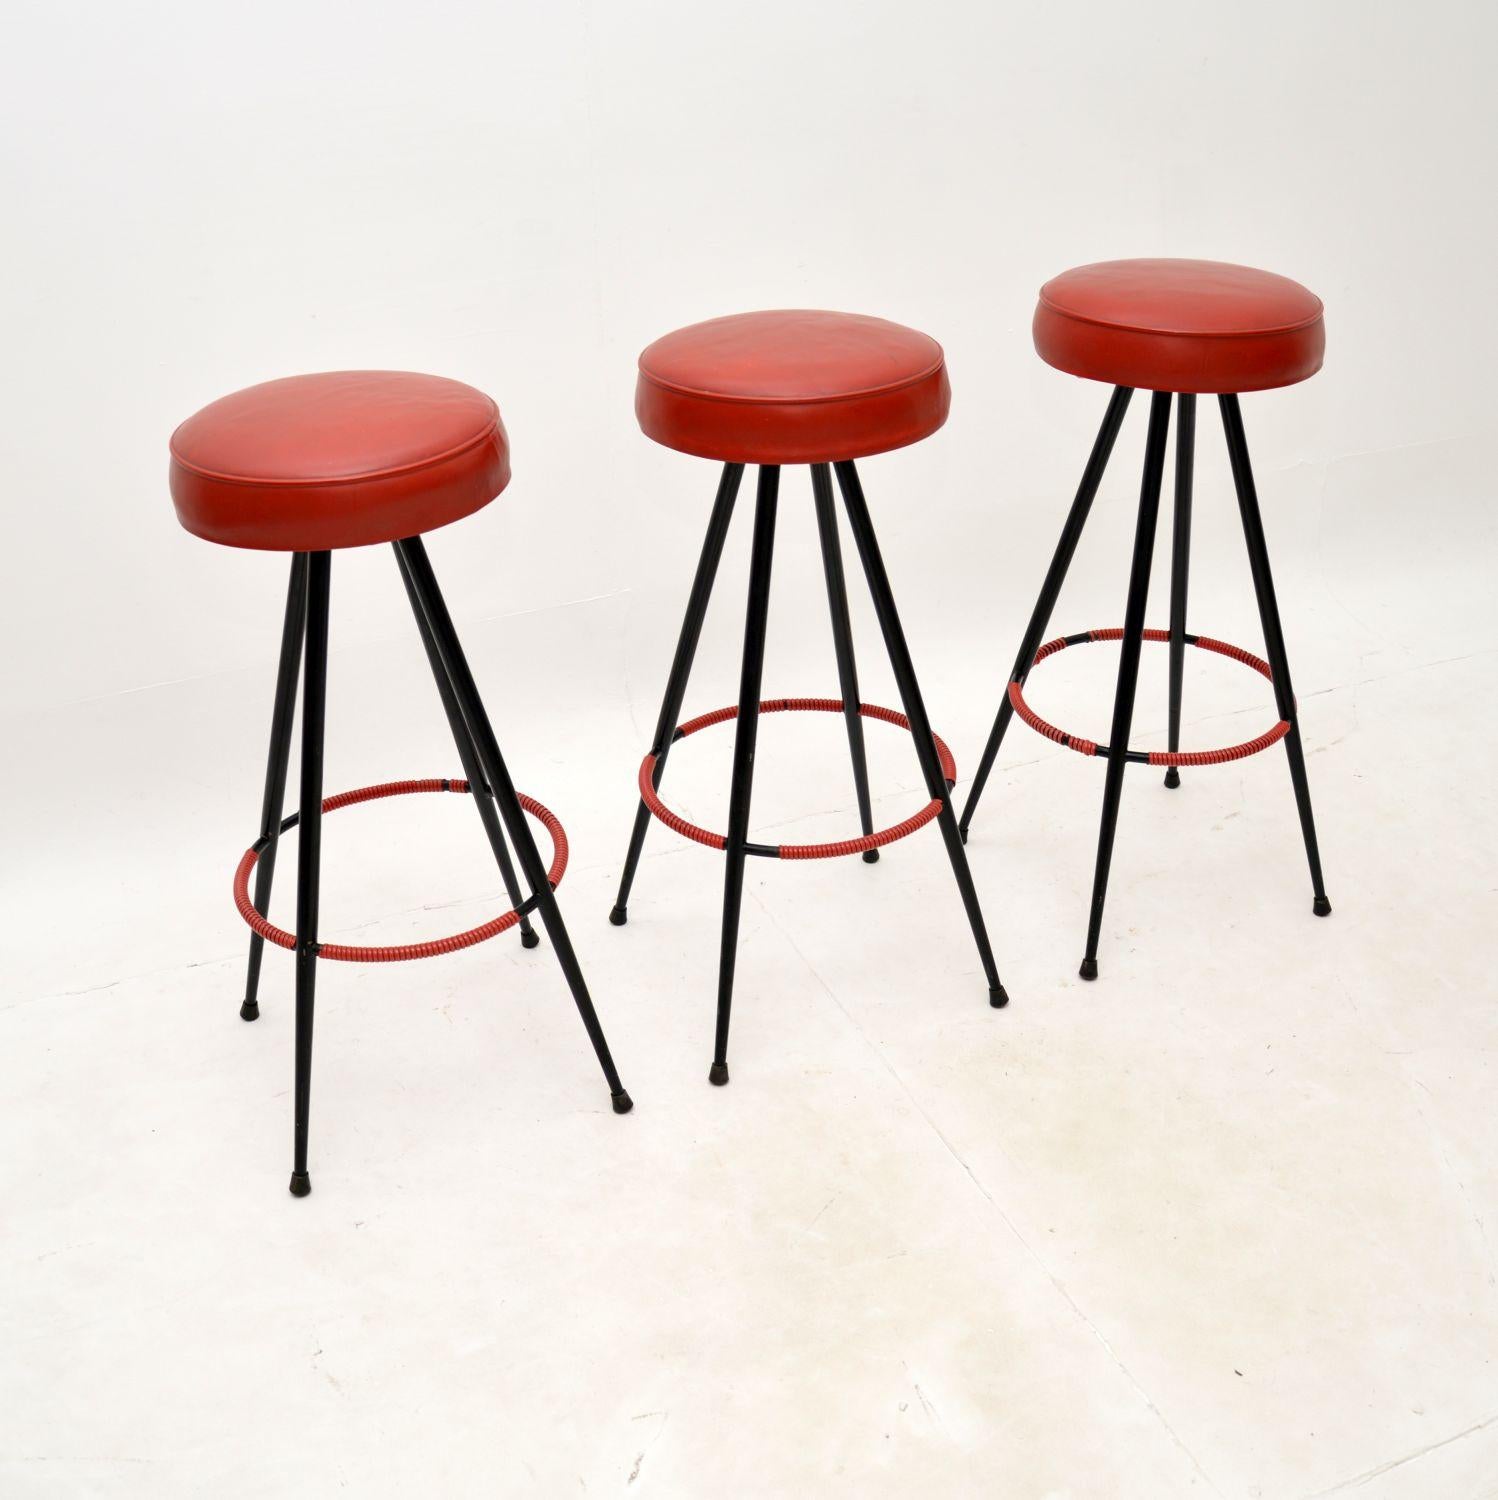 A stylish and very well made set of three vintage steel bar stools. They were made in England, they date from the 1950’s.

The quality is superb, they are beautifully designed with gorgeous red vinyl seats and red woven cord on the foot rests. The